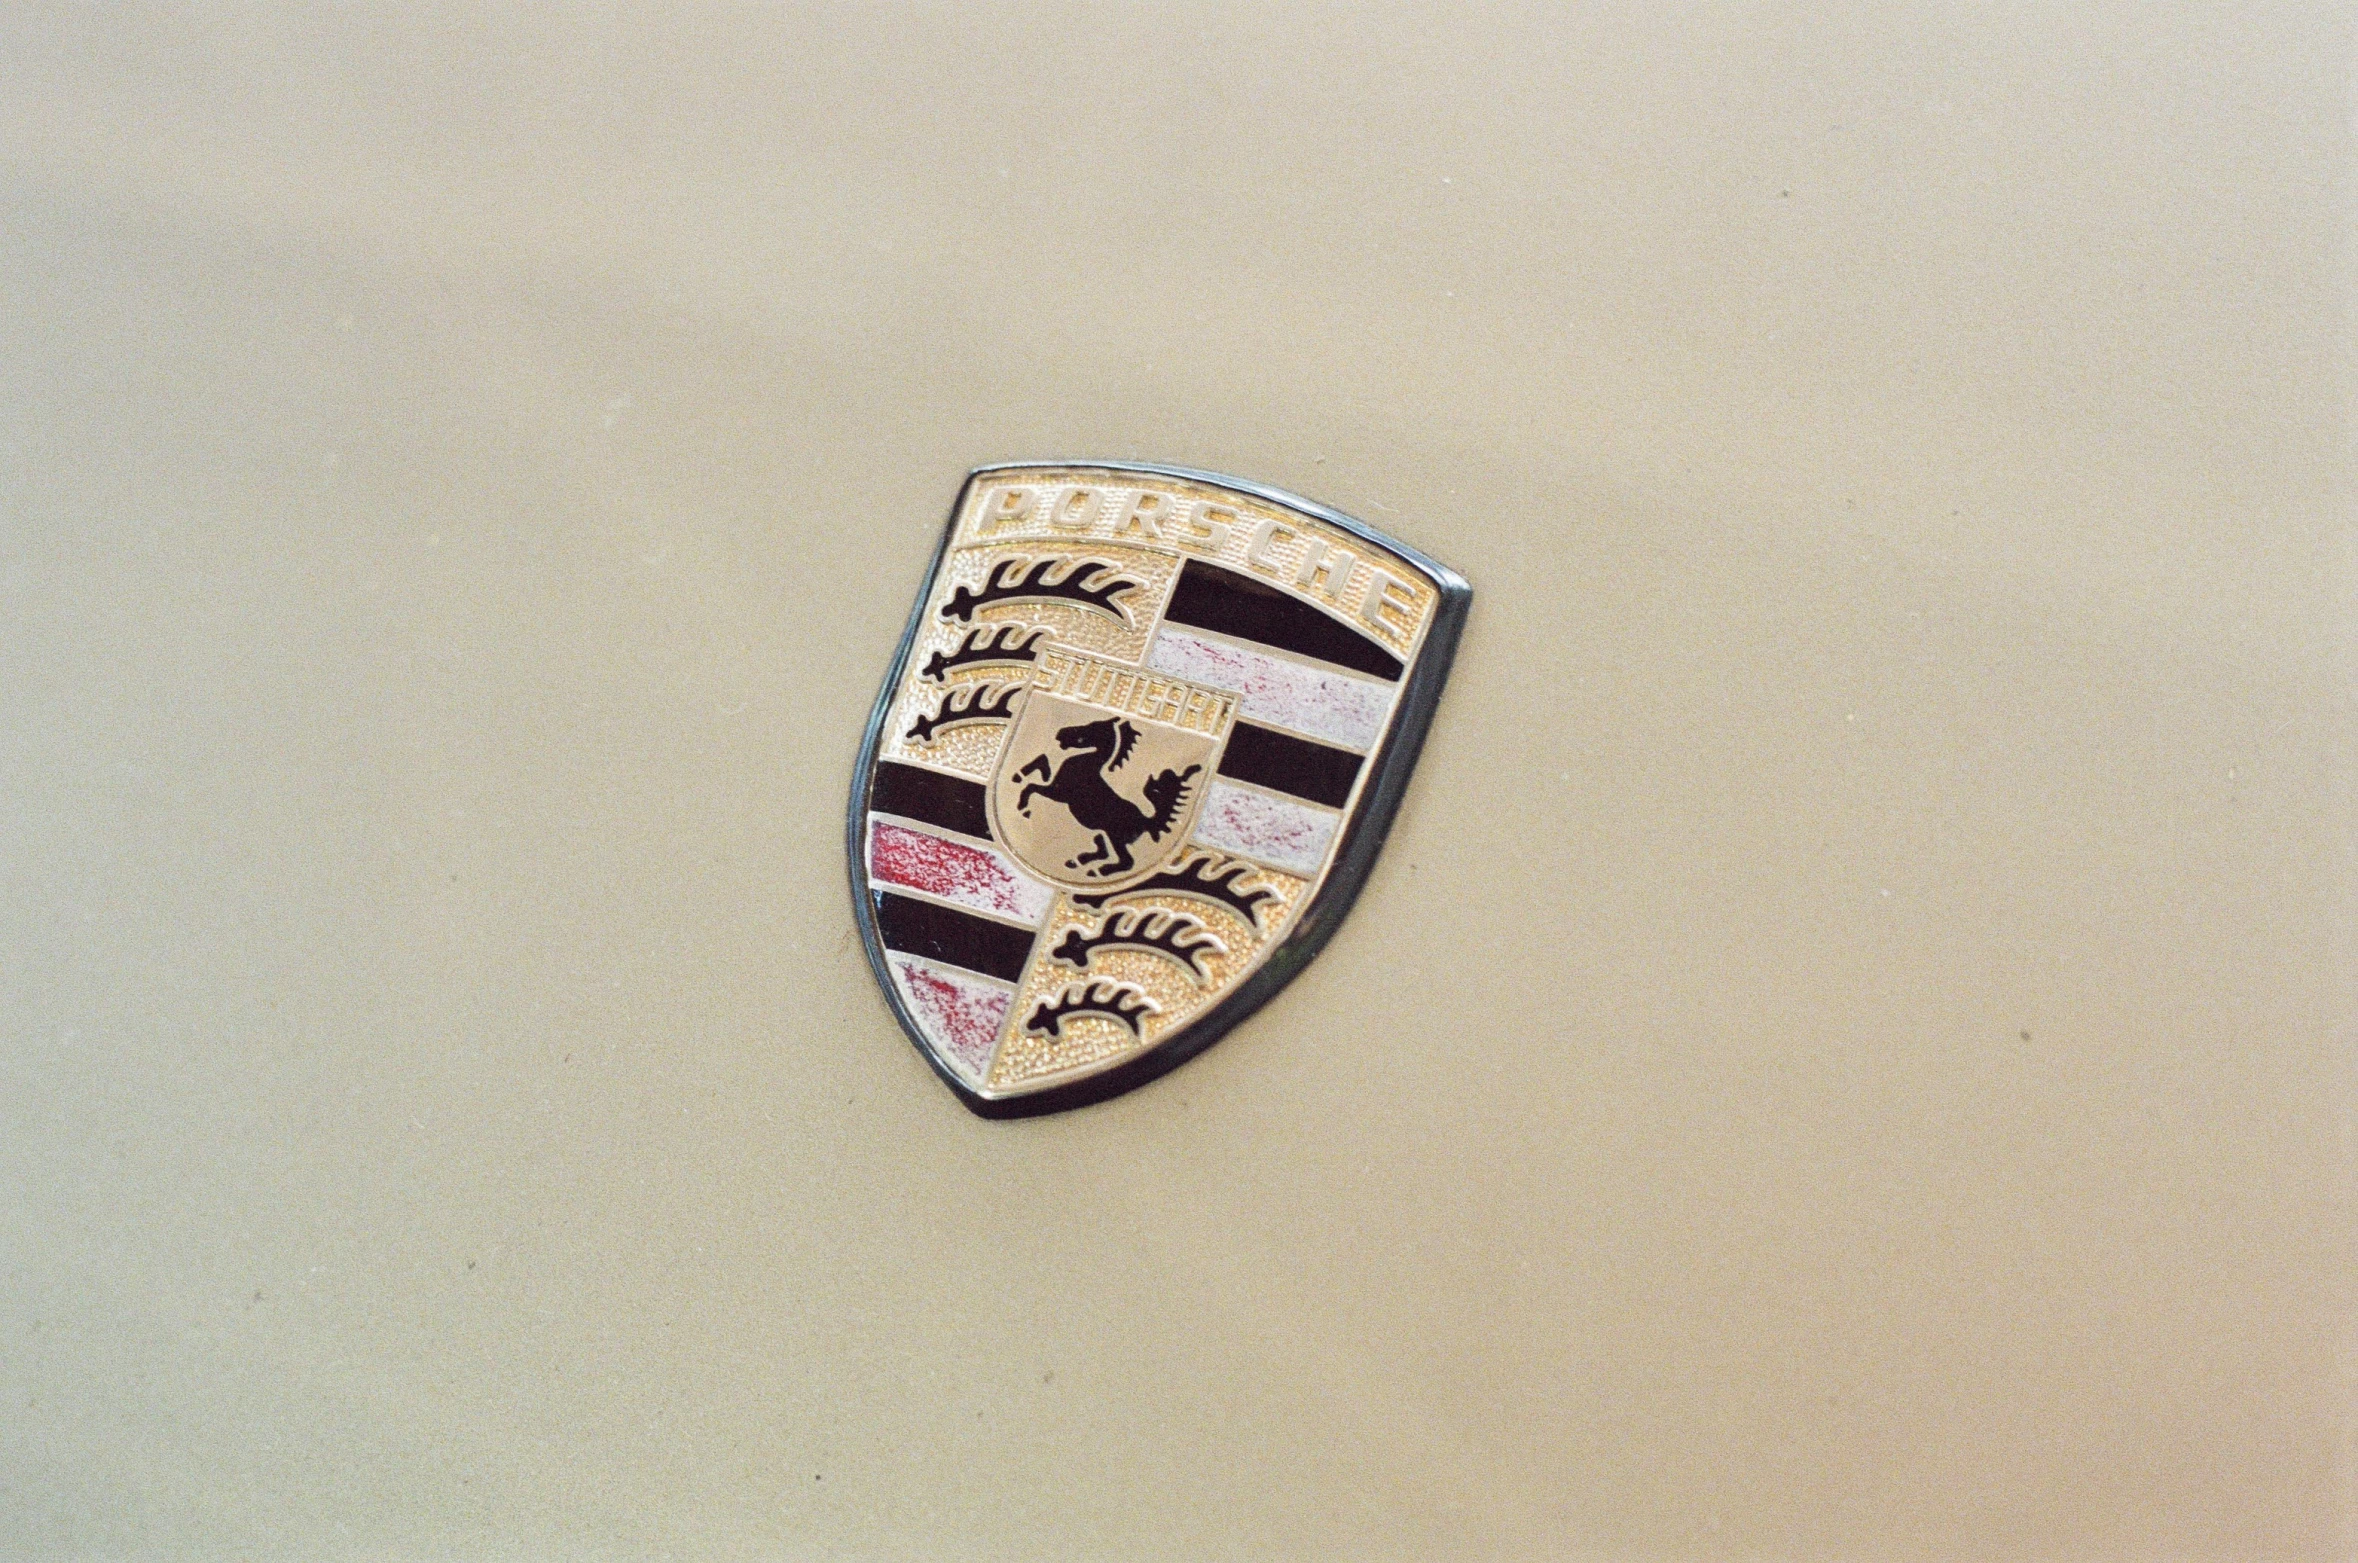 a small badge on the back of a white car